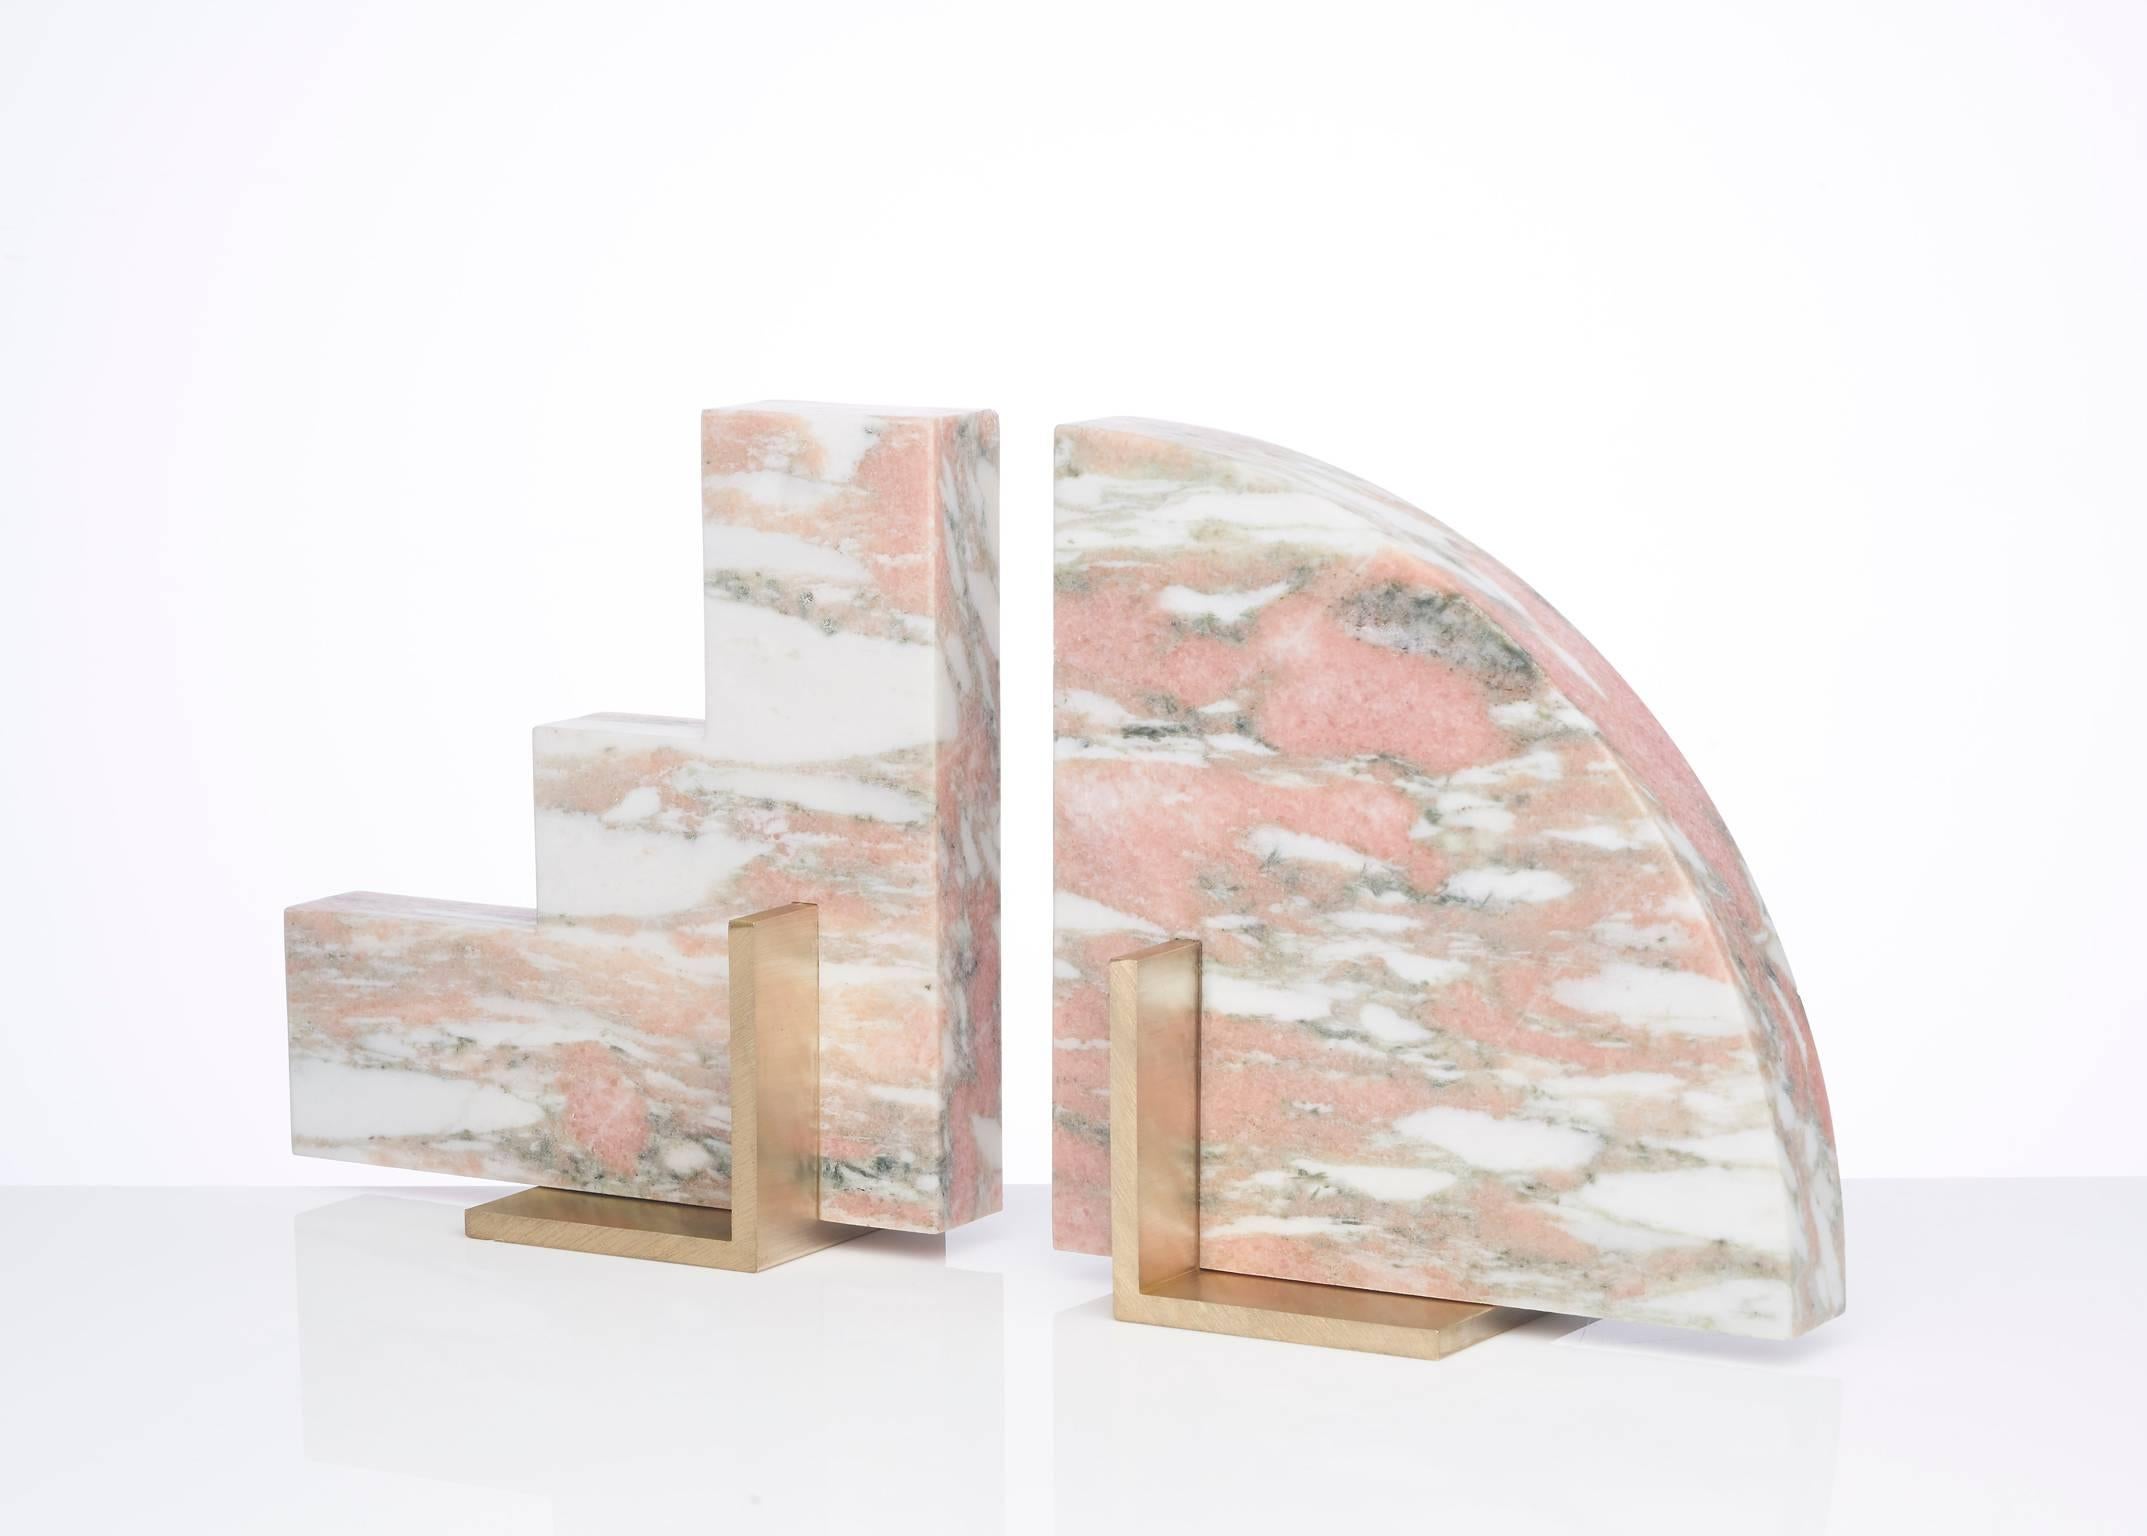 Meet Curvy and Steppy; the two individual bookends which as a pair are known as The Odd Couple Bookends.
Here shown in a honed Norwegian Rose marble with a brushed brass base.
The marble is cut into two geometric shapes and balanced over a brass